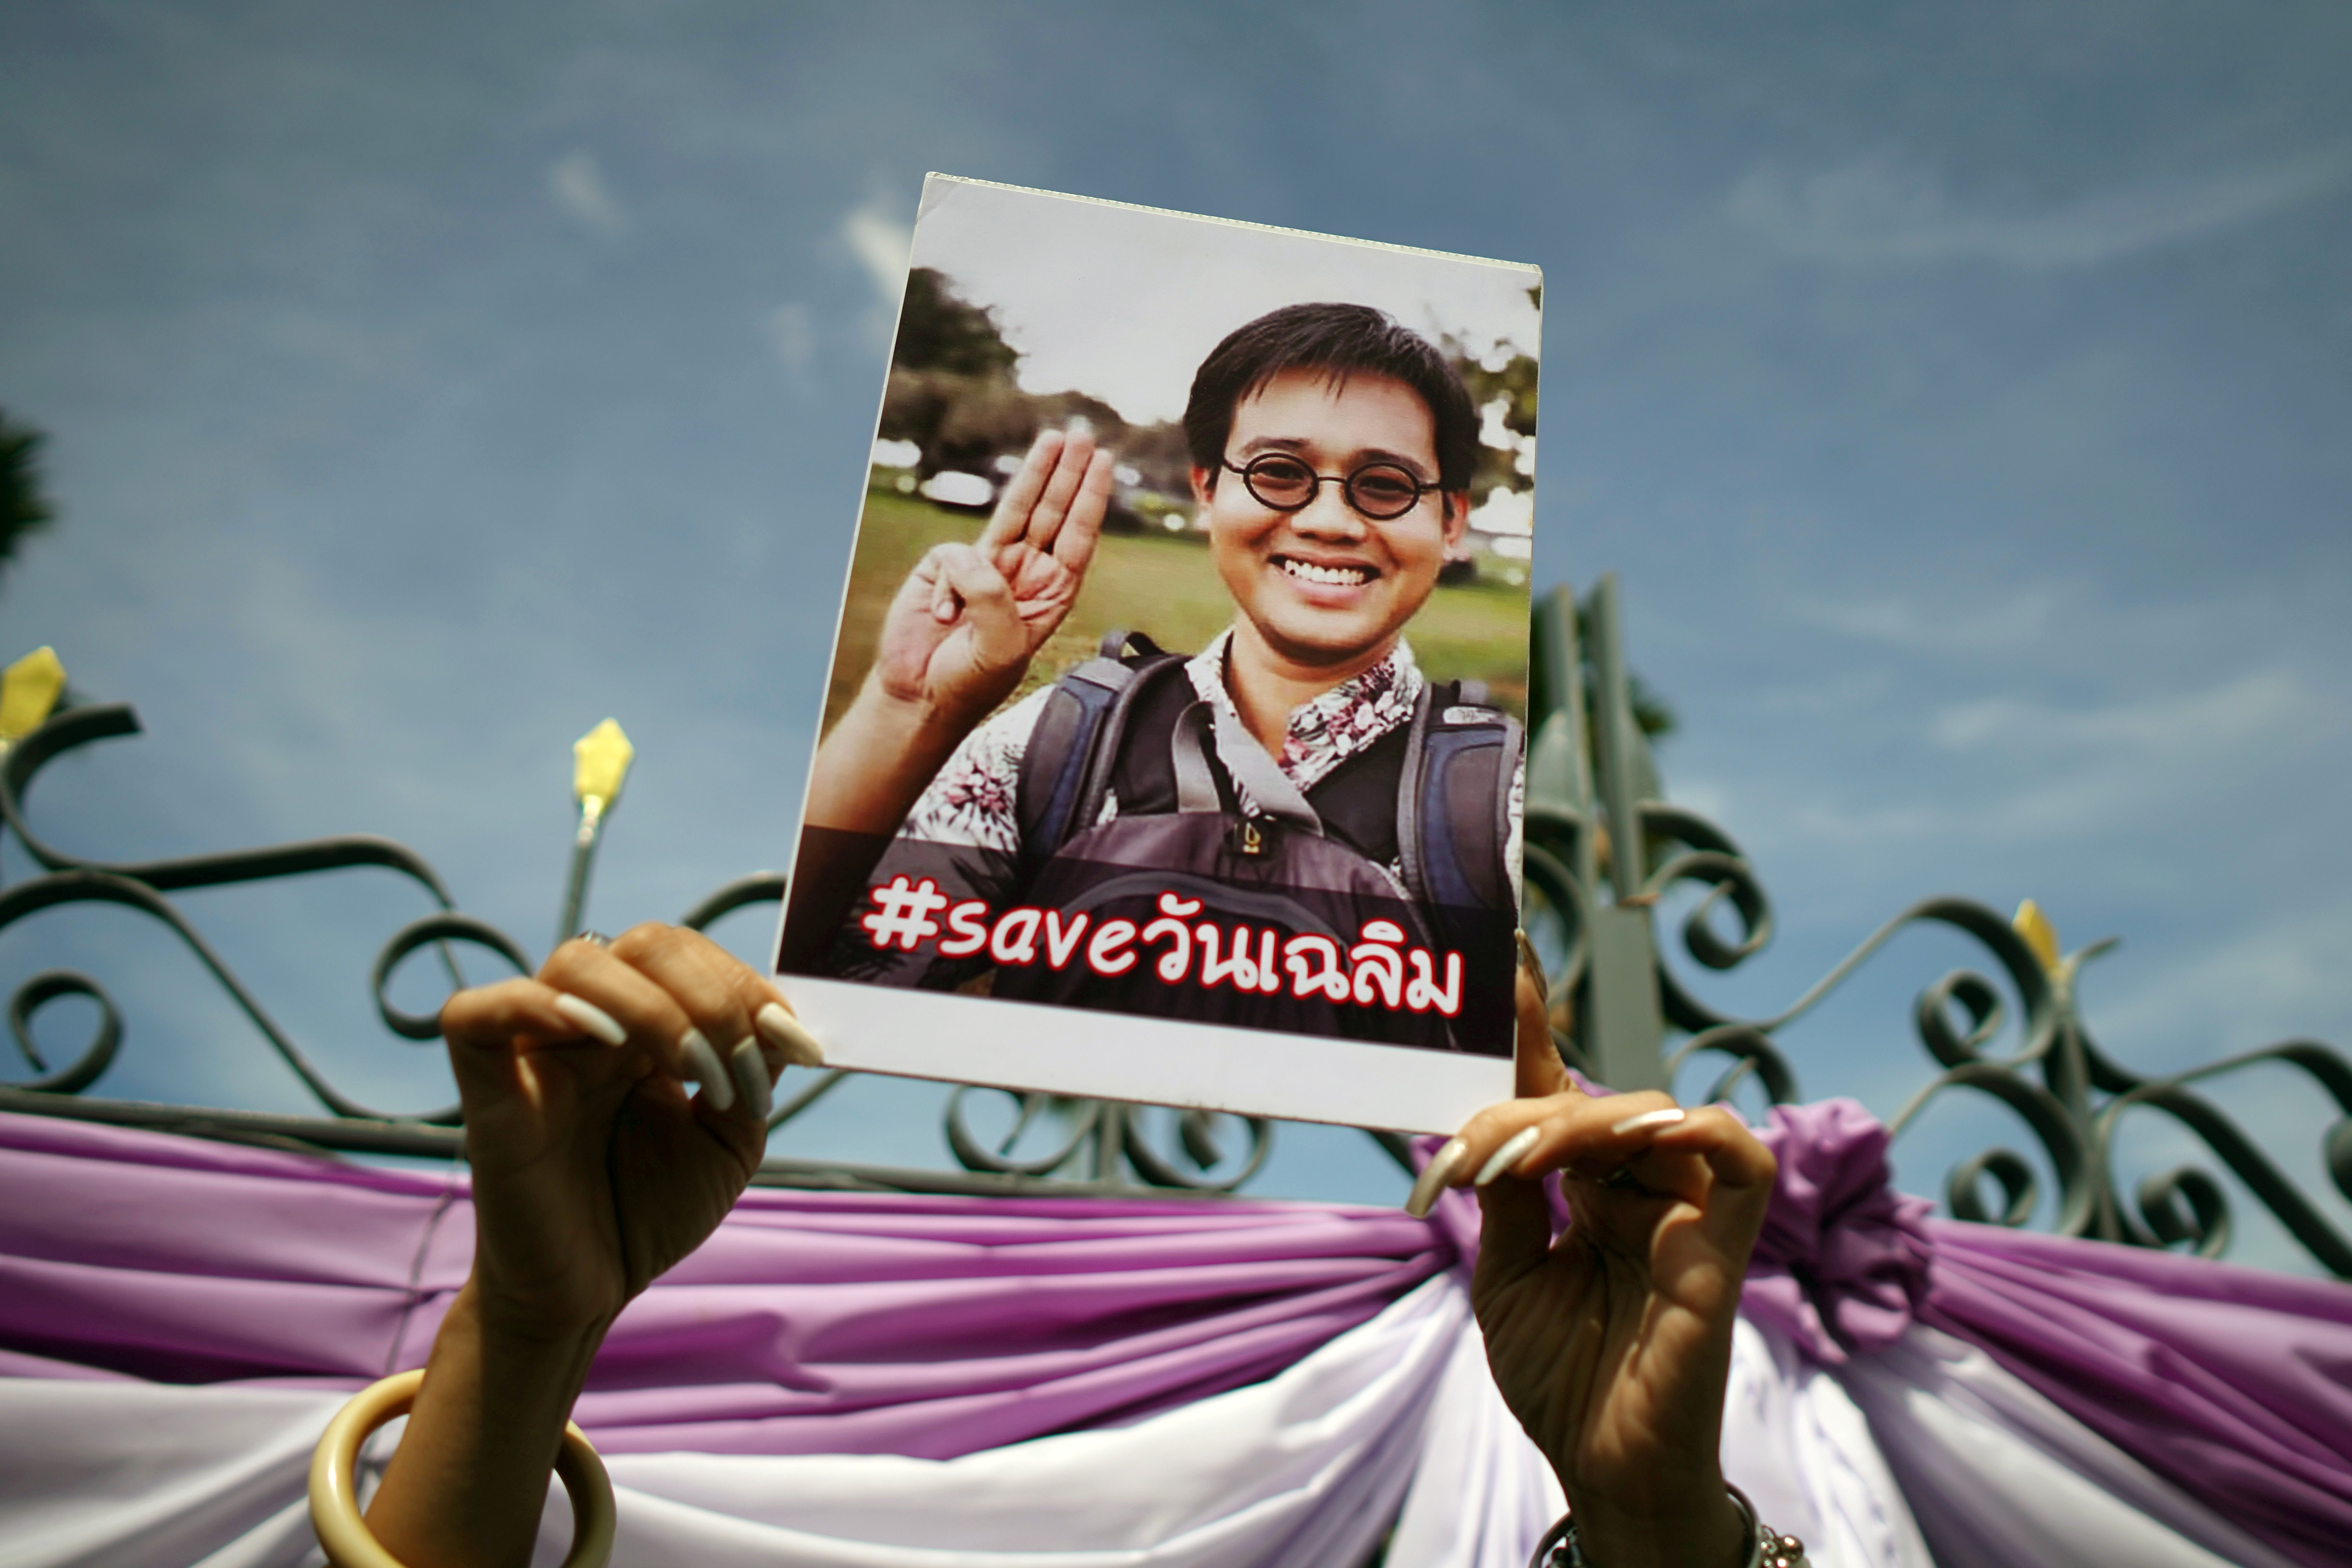 A photo of Thai activist Wanchalearm Satsaksit being held up as people gather in support of him during a protest calling for an investigation, in front of Government House in Bangkok, Thailand, June 12, 2020.